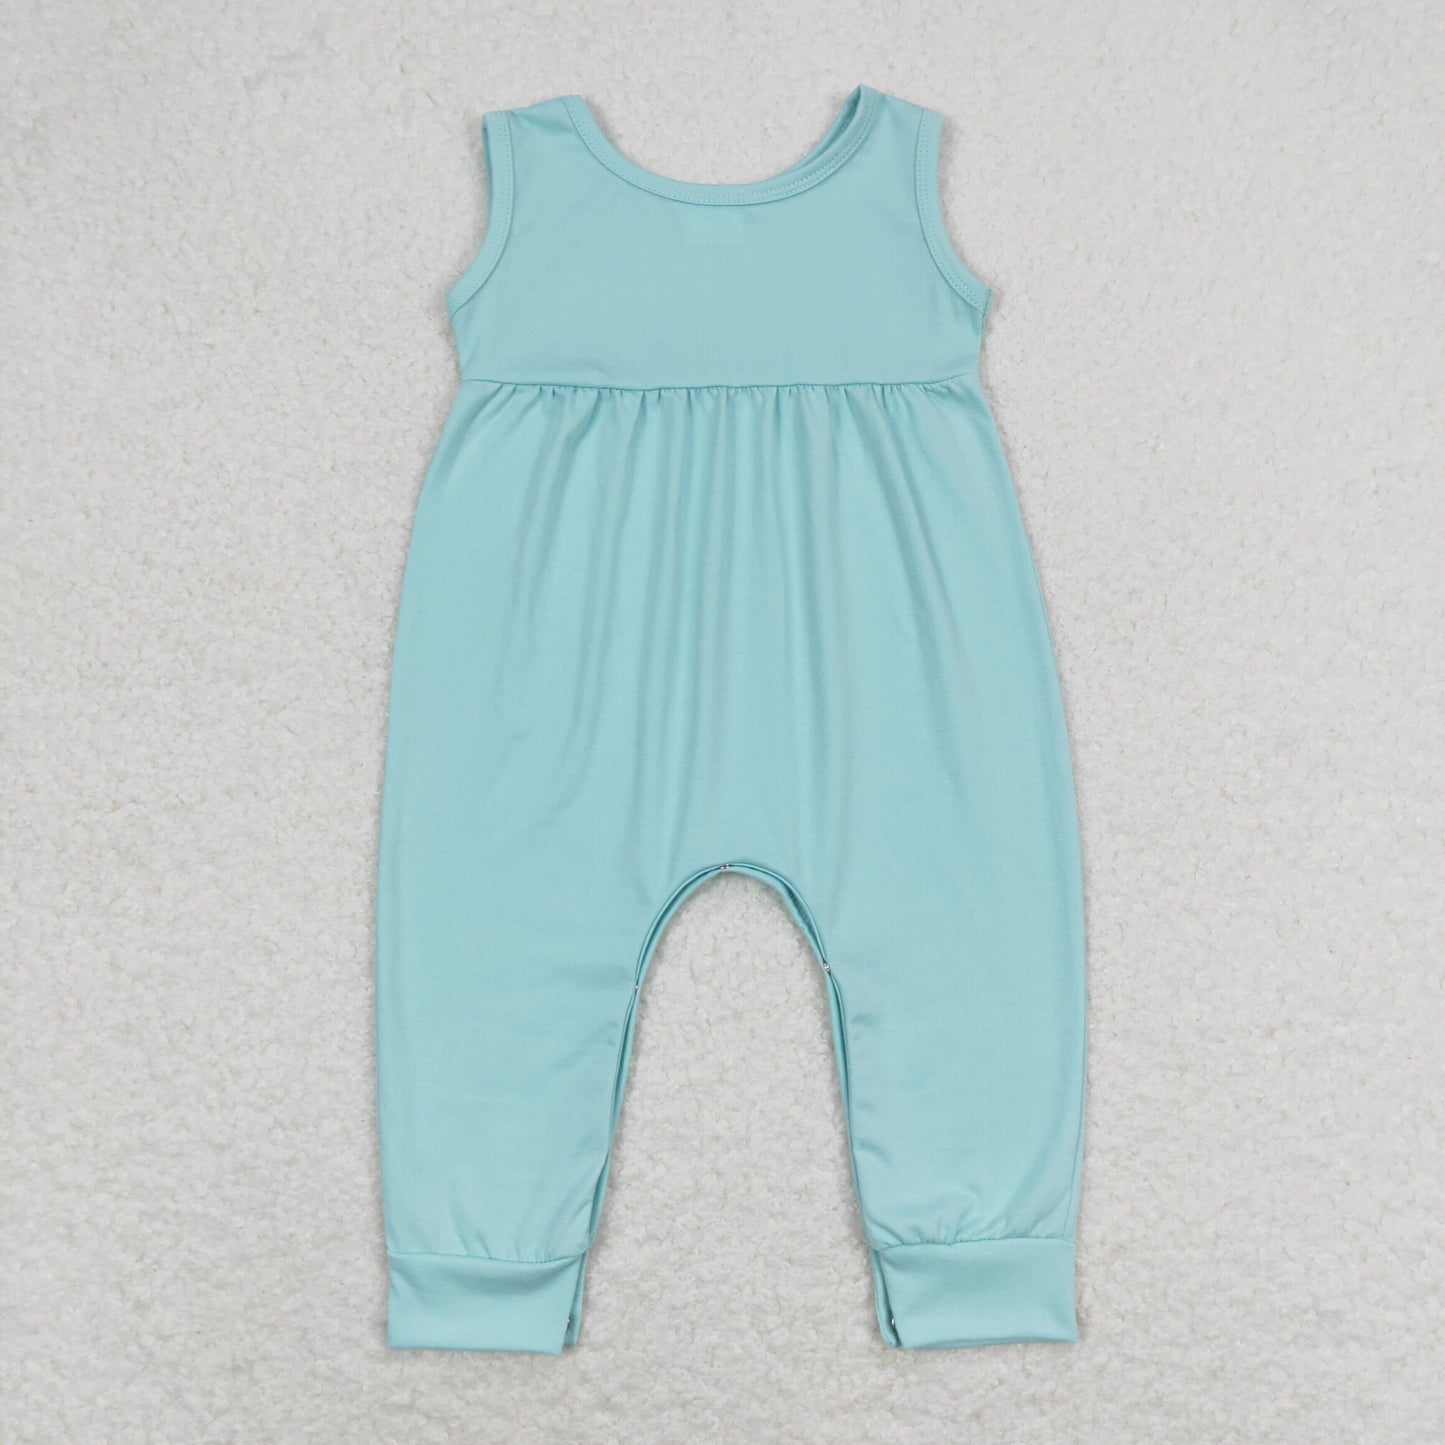 colorful romper RTS sibling clothes